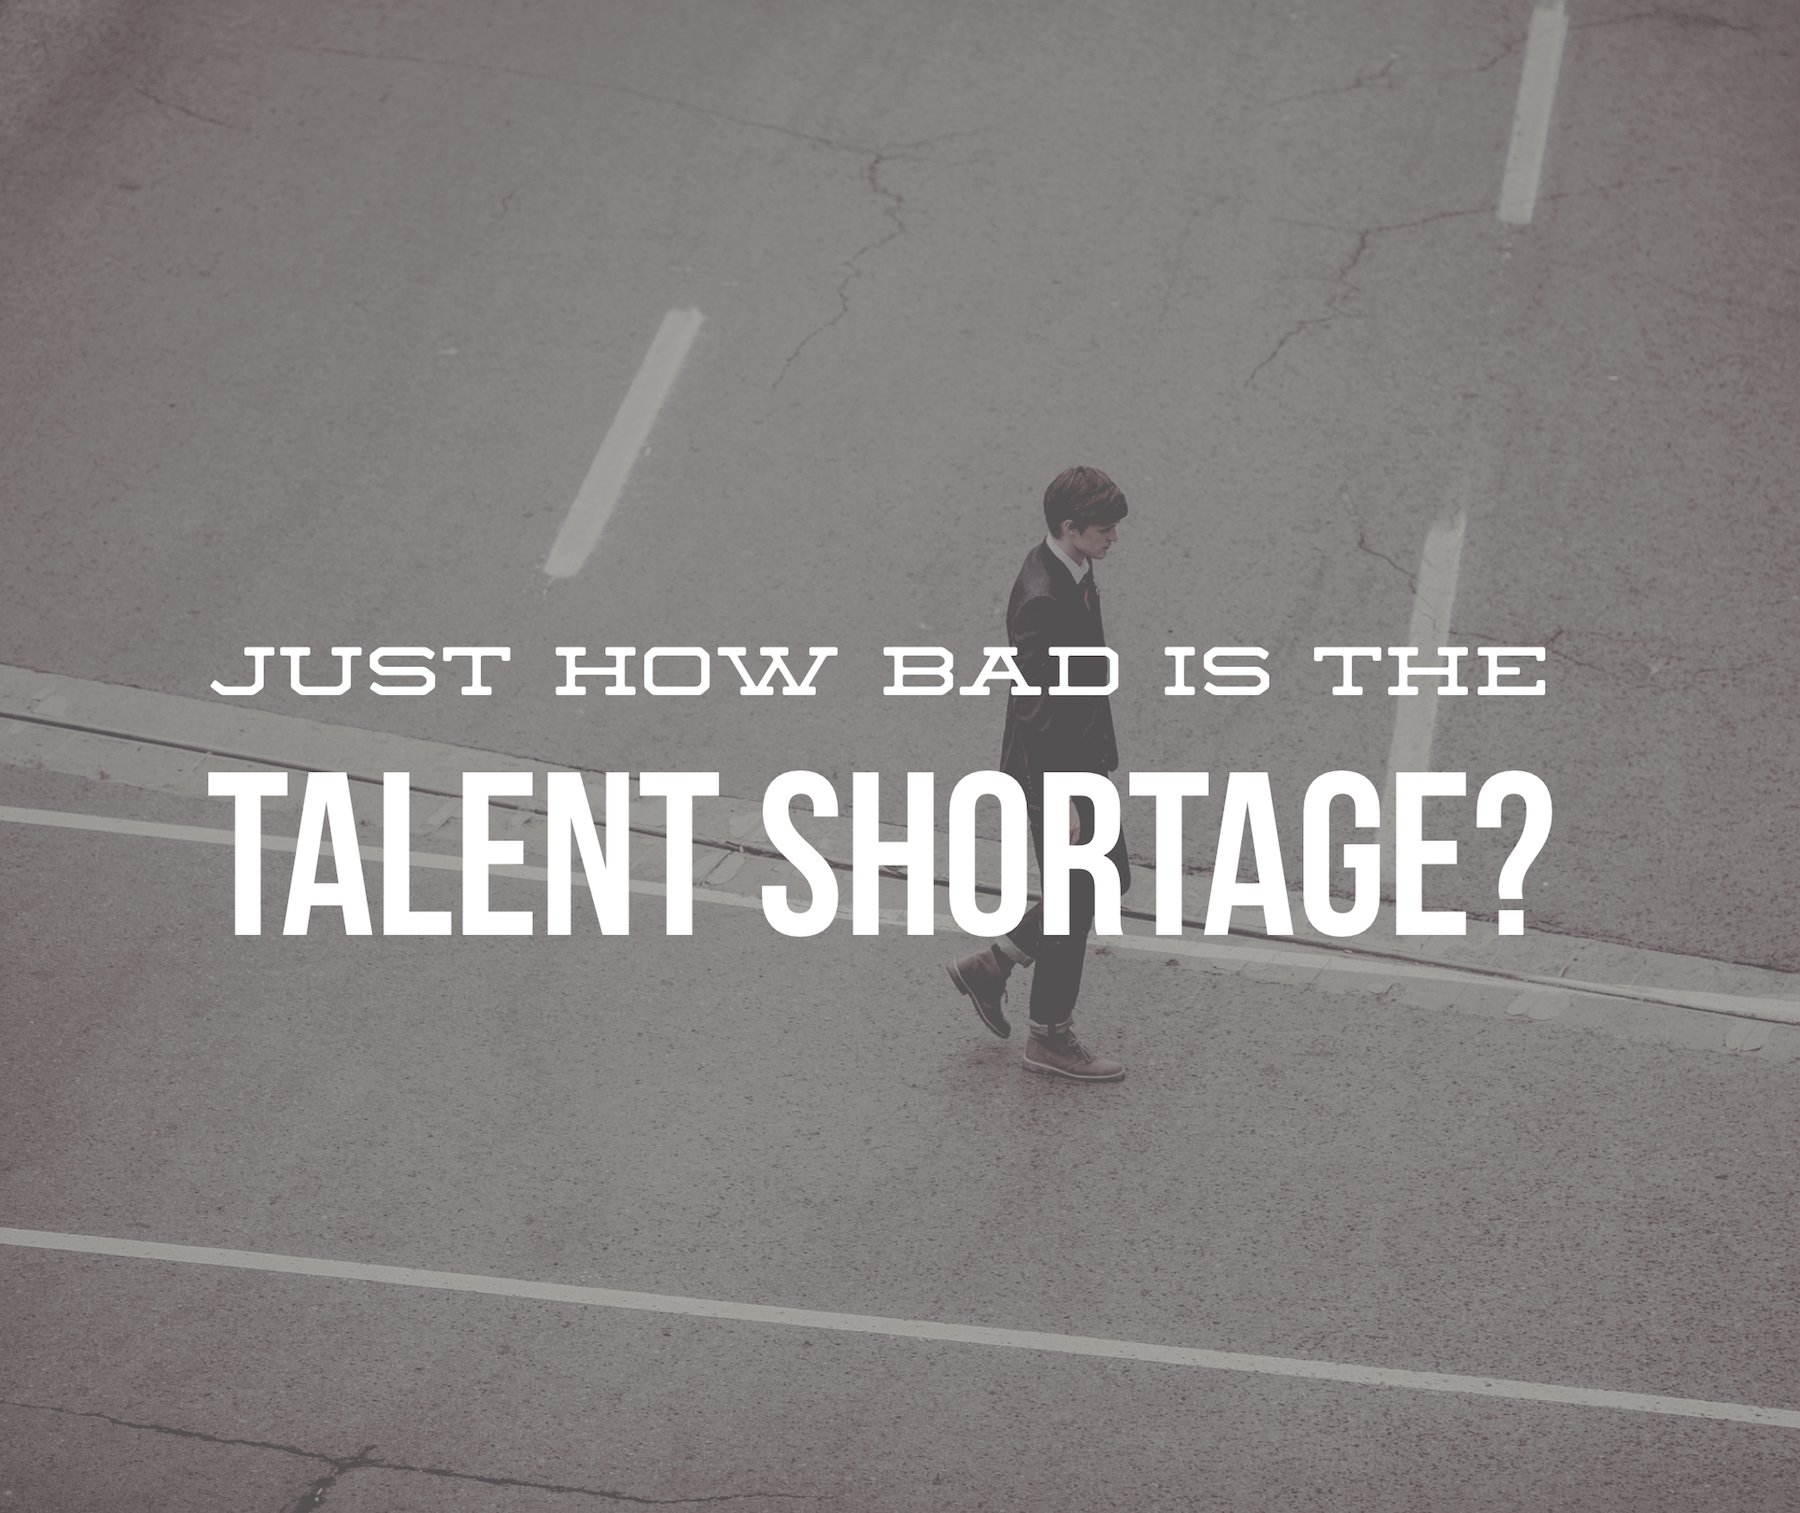 Just How Bad is the Talent Shortage?